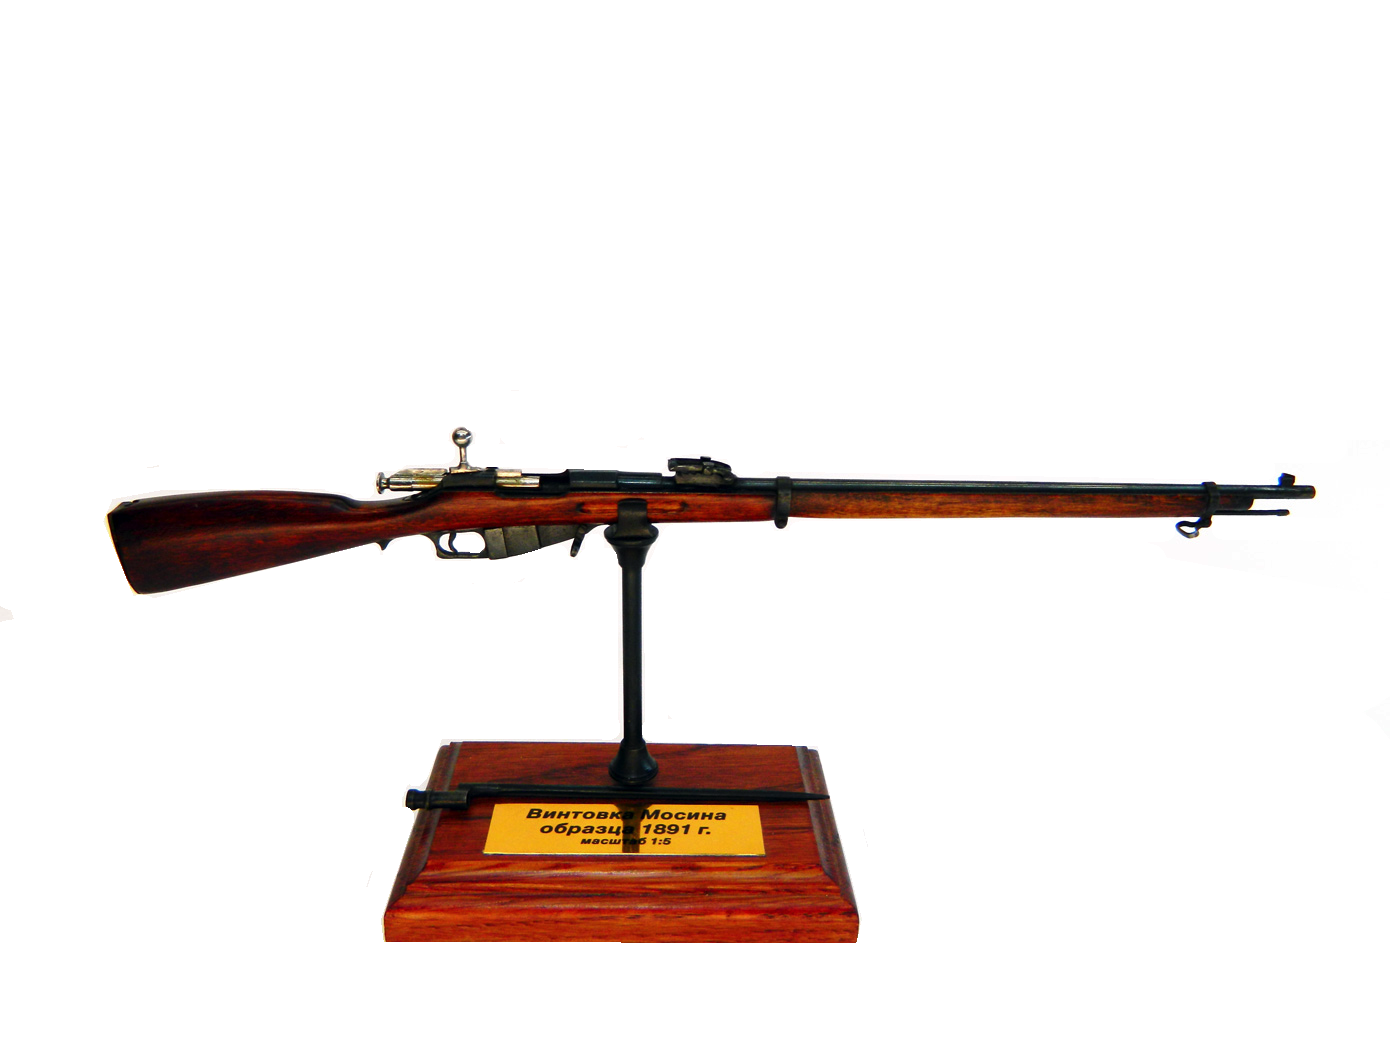 Model Mosin Nagant rifle on a scale of 1:5